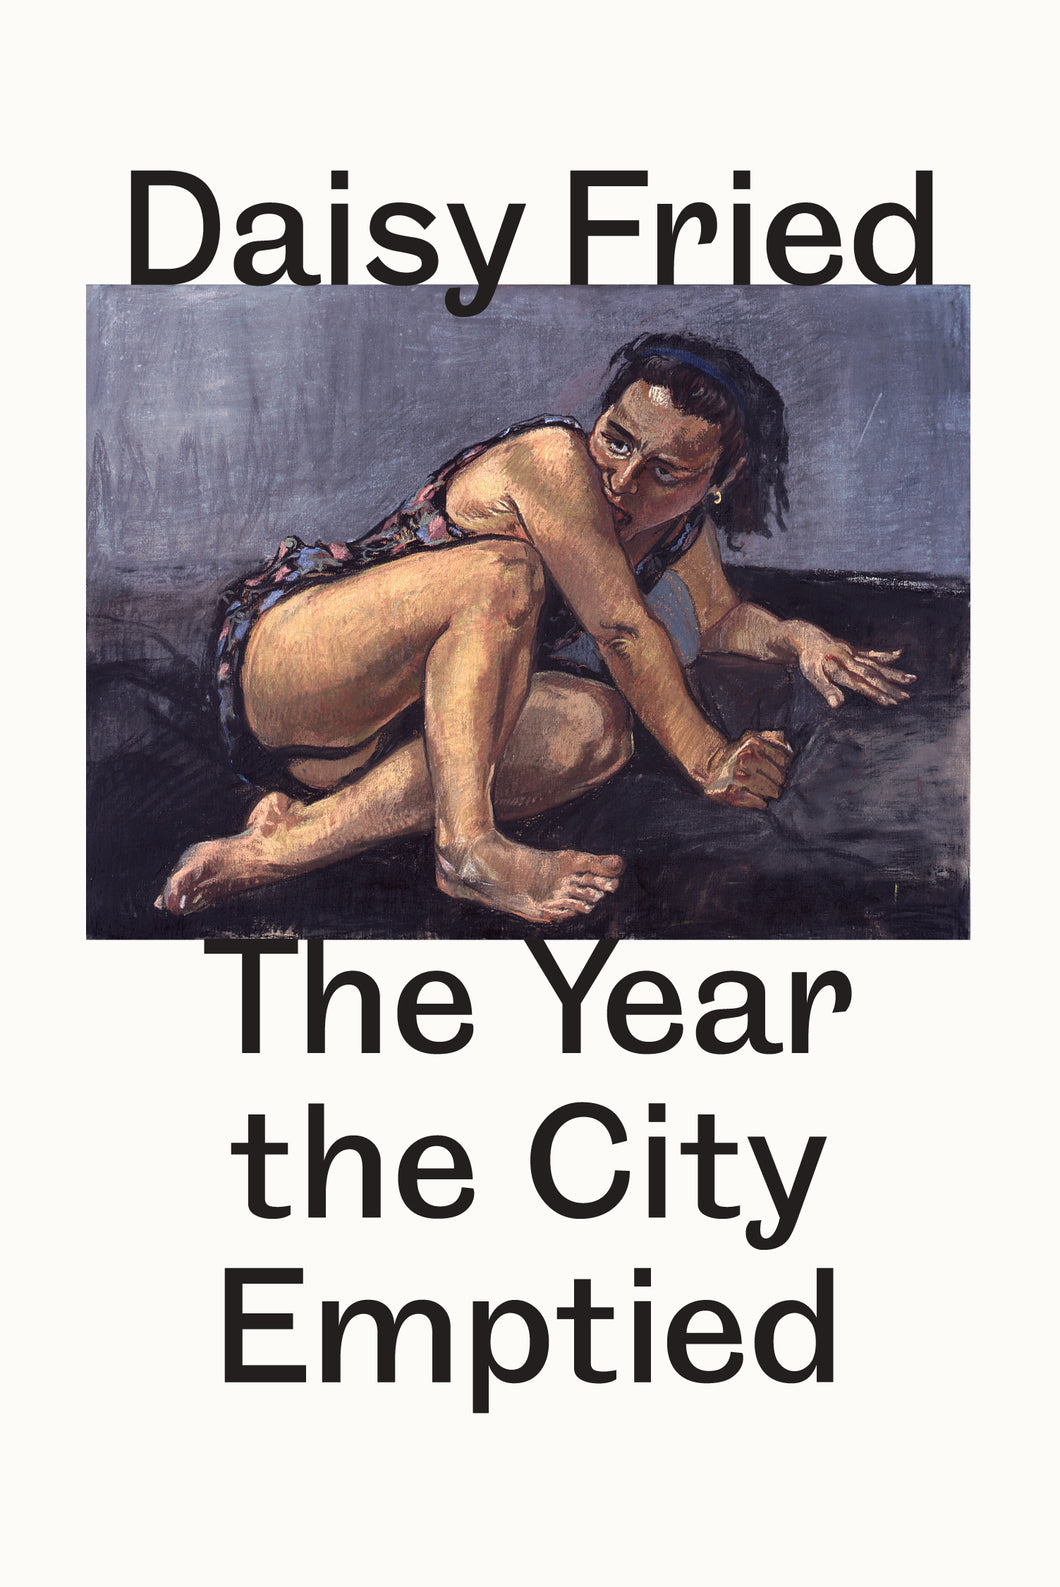 Fried, Daisy: The Year the City Emptied: After Baudelaire